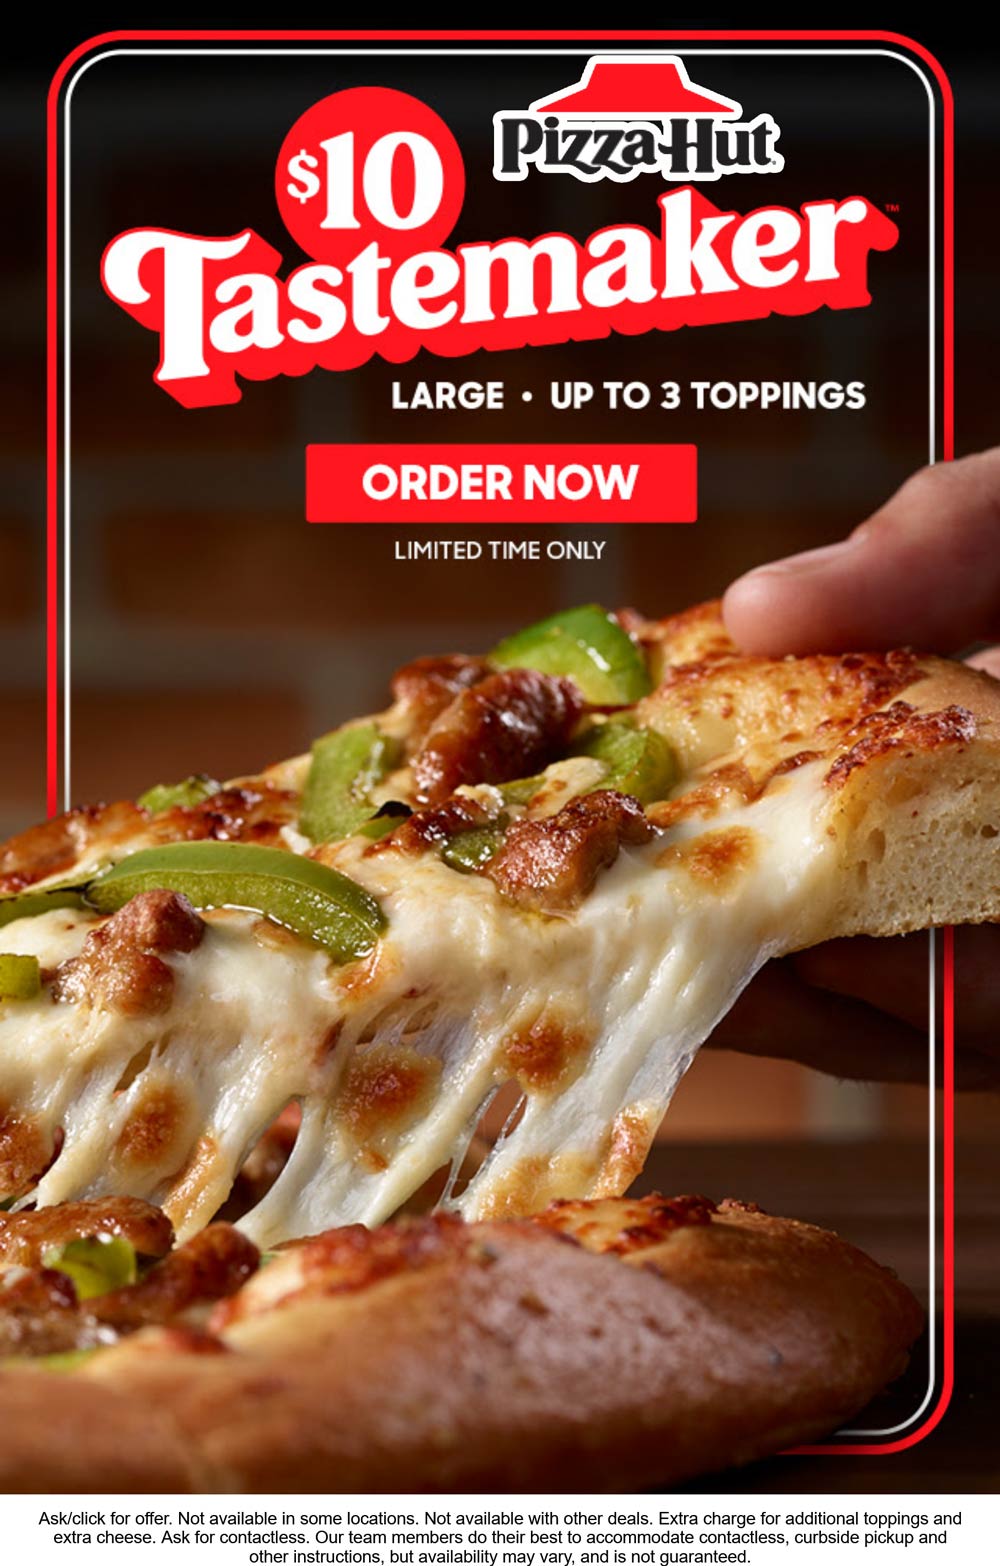 3topping large for 10 at Pizza Hut pizzahut The Coupons App®